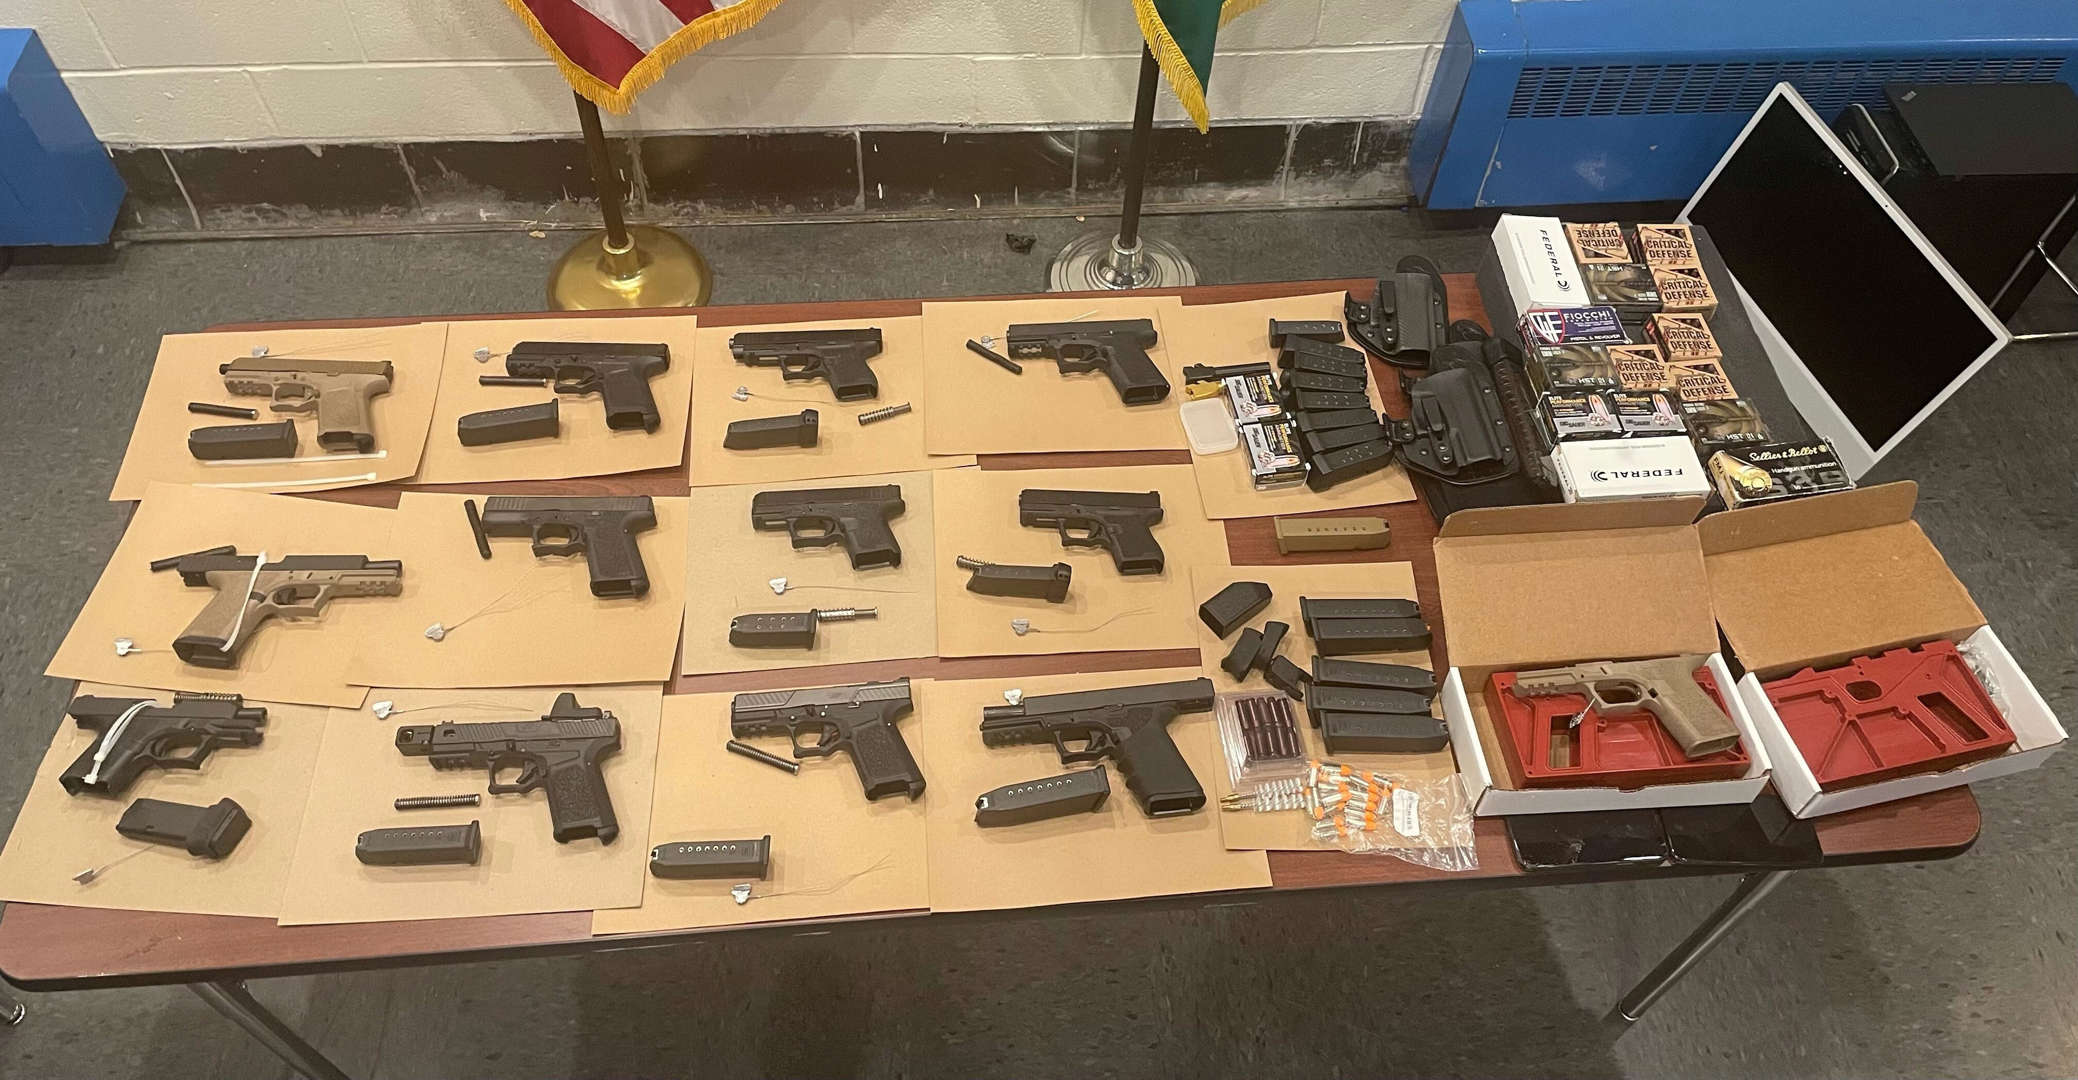 seized guns, accessories and builds